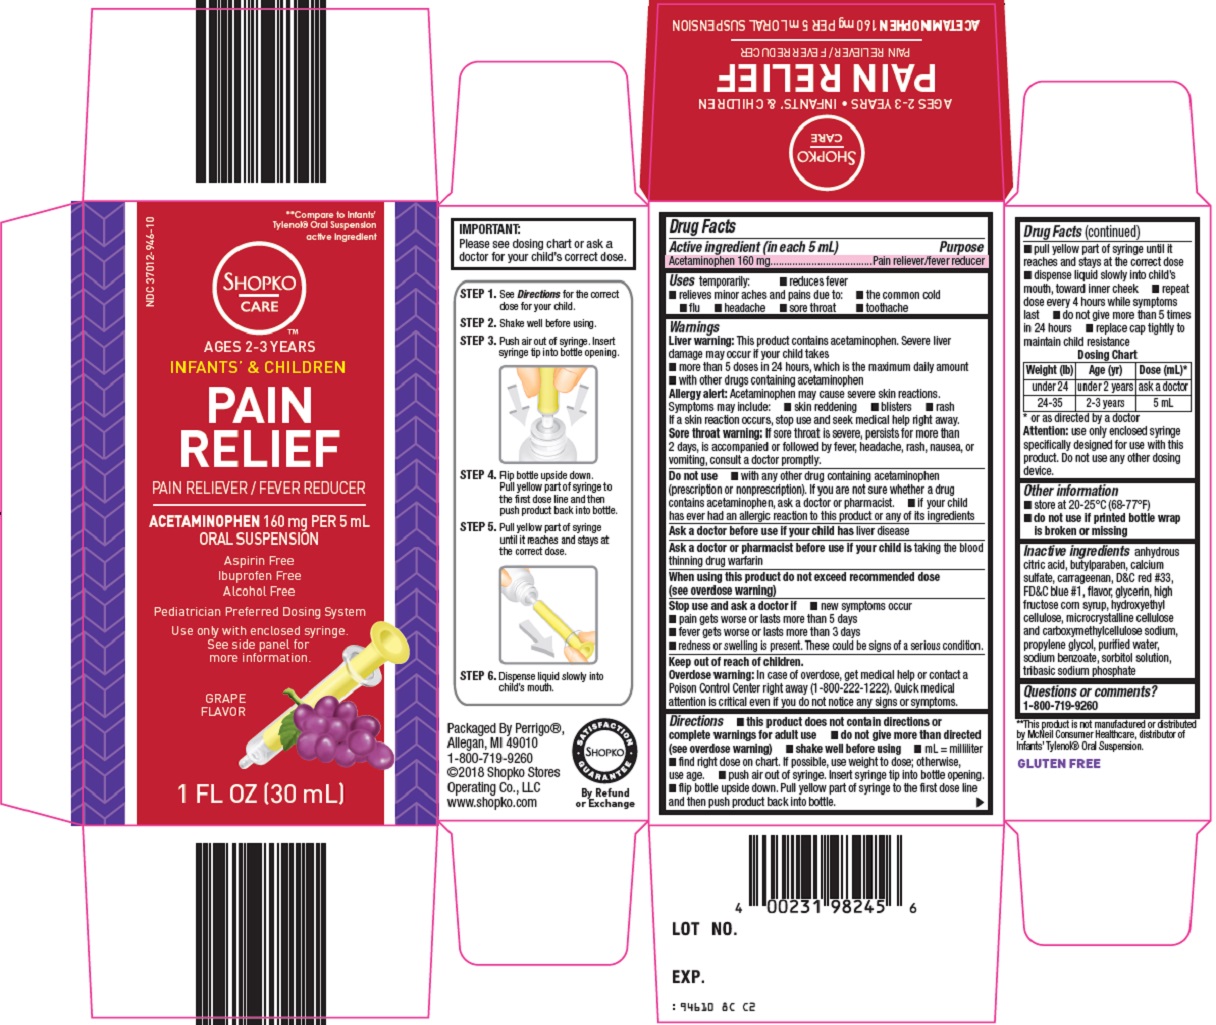 infants-childrens-pain-relief-image